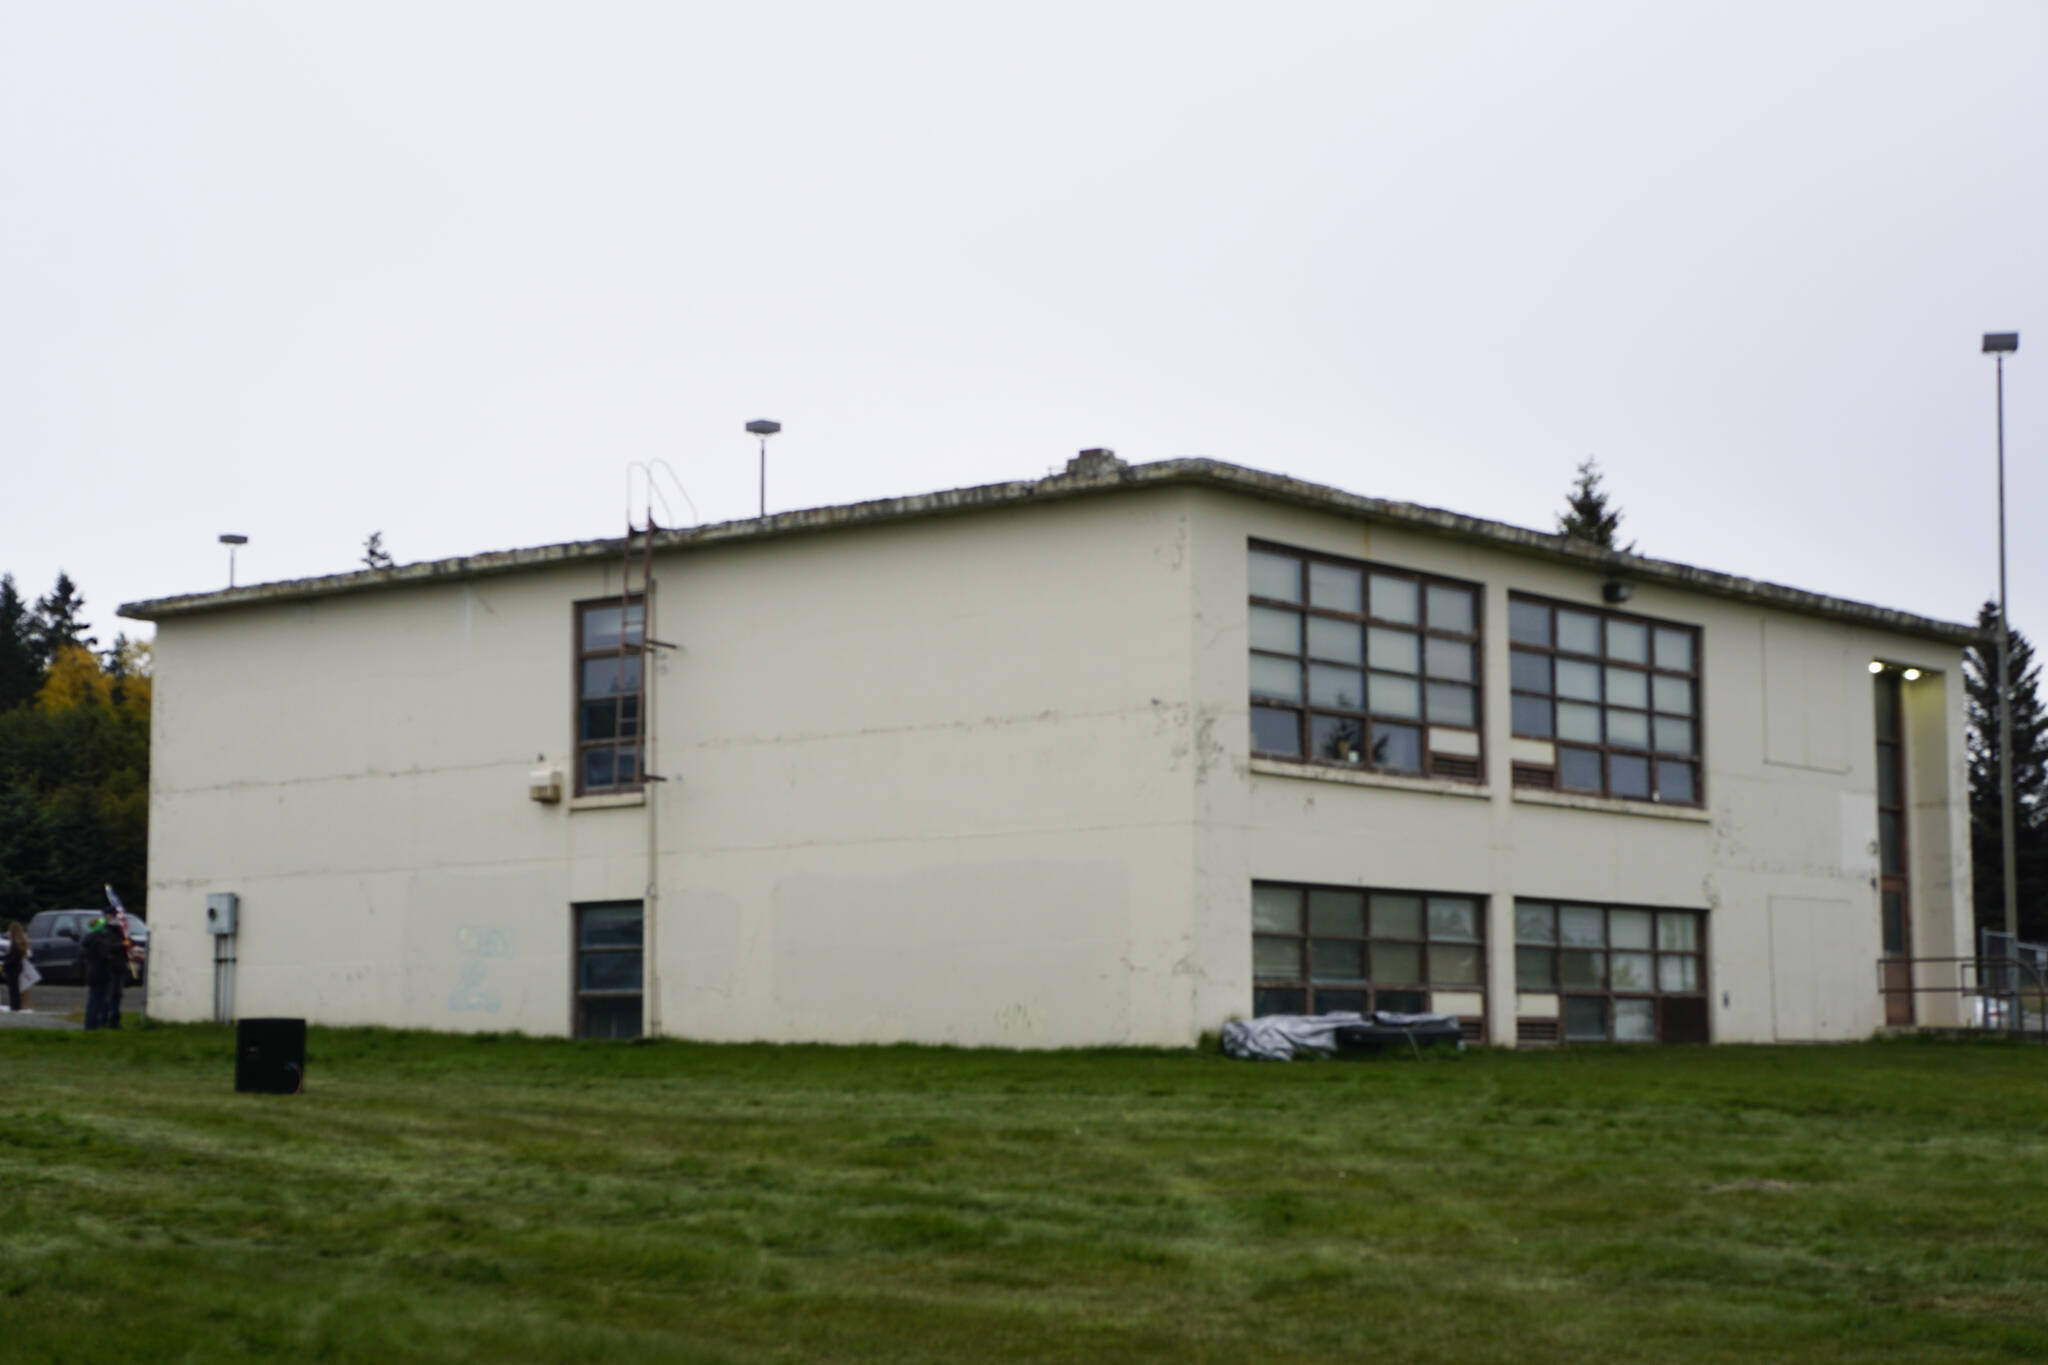 The small Homer Educational and Recreational Complex, or HERC, building is seen here on Oct. 2, 2021, in Homer, Alaska. Known as HERC 2, the former school building had been used as a shop by the Public Works Department, but staff relocated into HERC 1, the larger building, after cracks appeared in the walls and city officials had concerns about the building collapsing during an earthquake. (Photo by Michael Armstrong/Homer News)